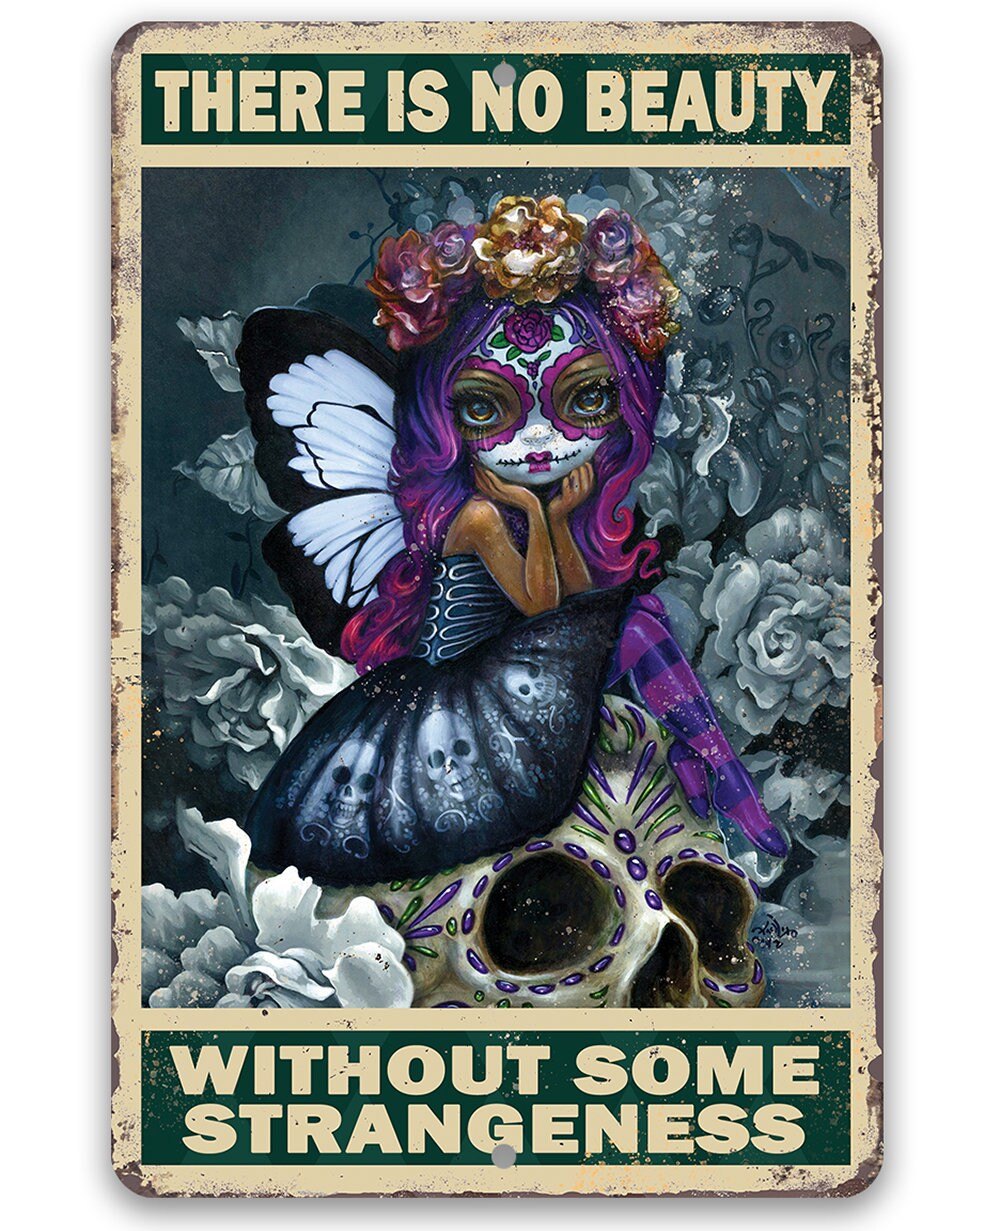 There is No Beauty Without Some Strangeness - 8" x 12" or 12" x 18" Aluminum Tin Awesome Metal Poster Lone Star Art 